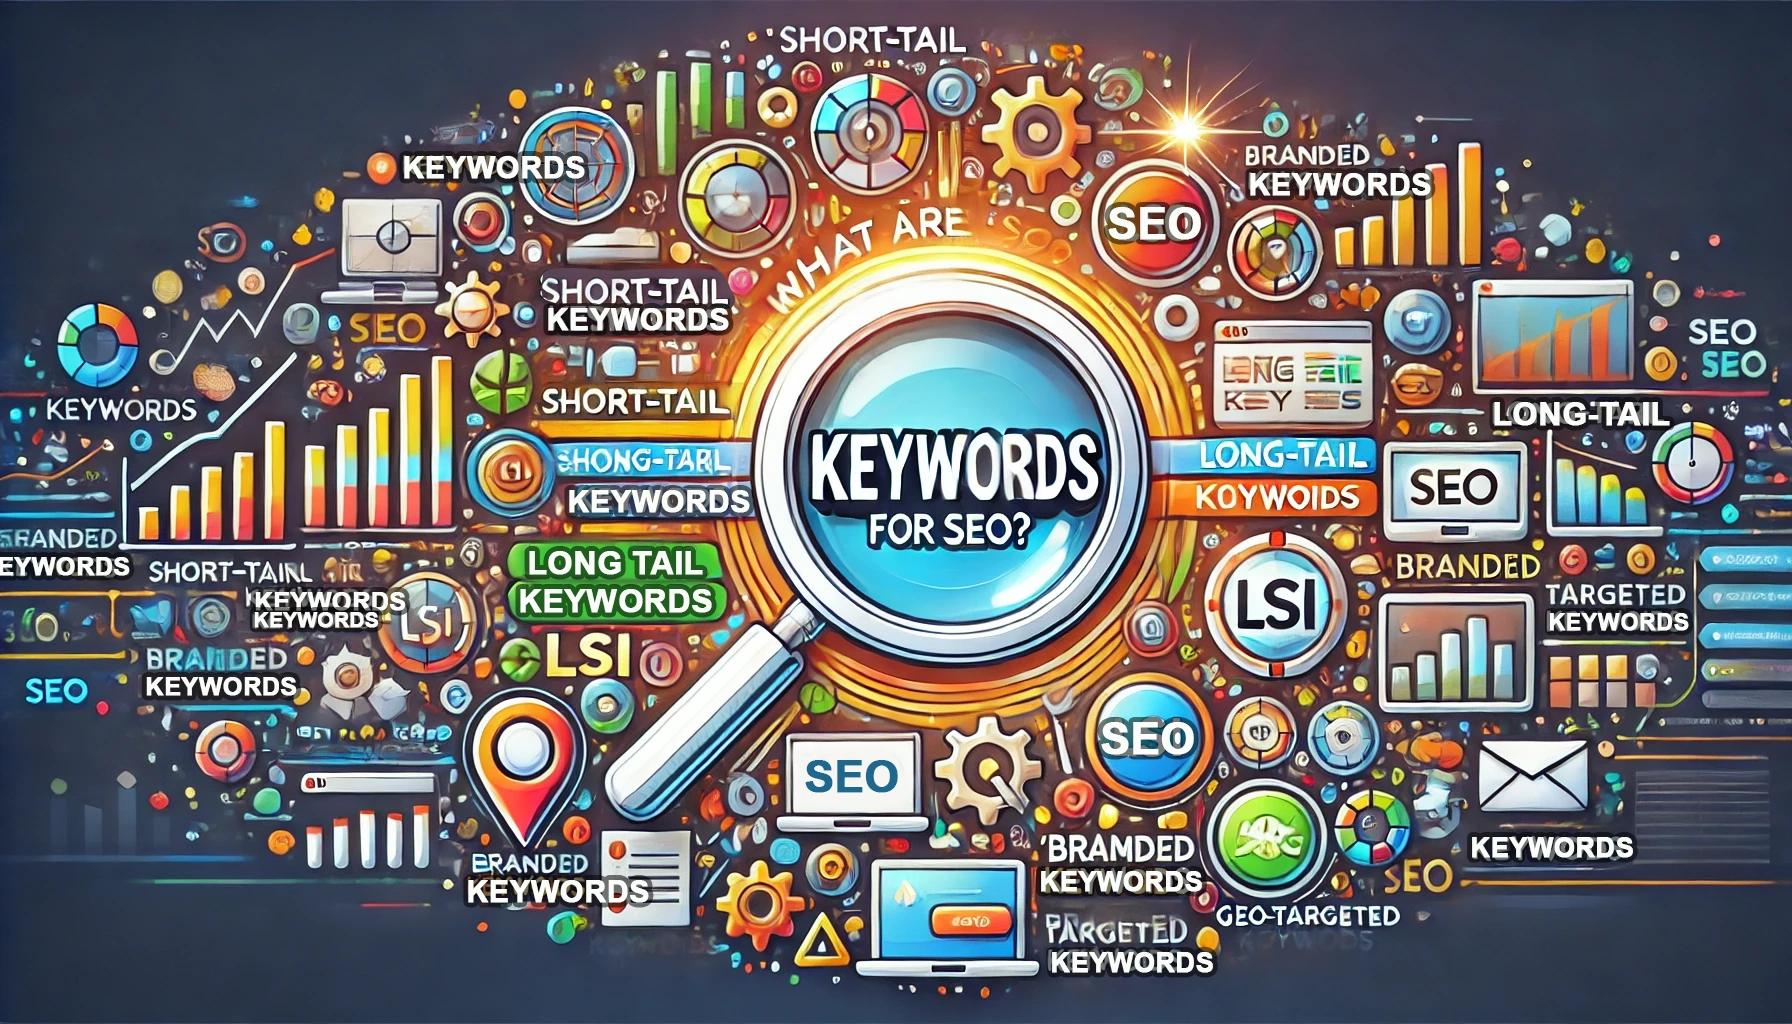 What Are Keywords for SEO?